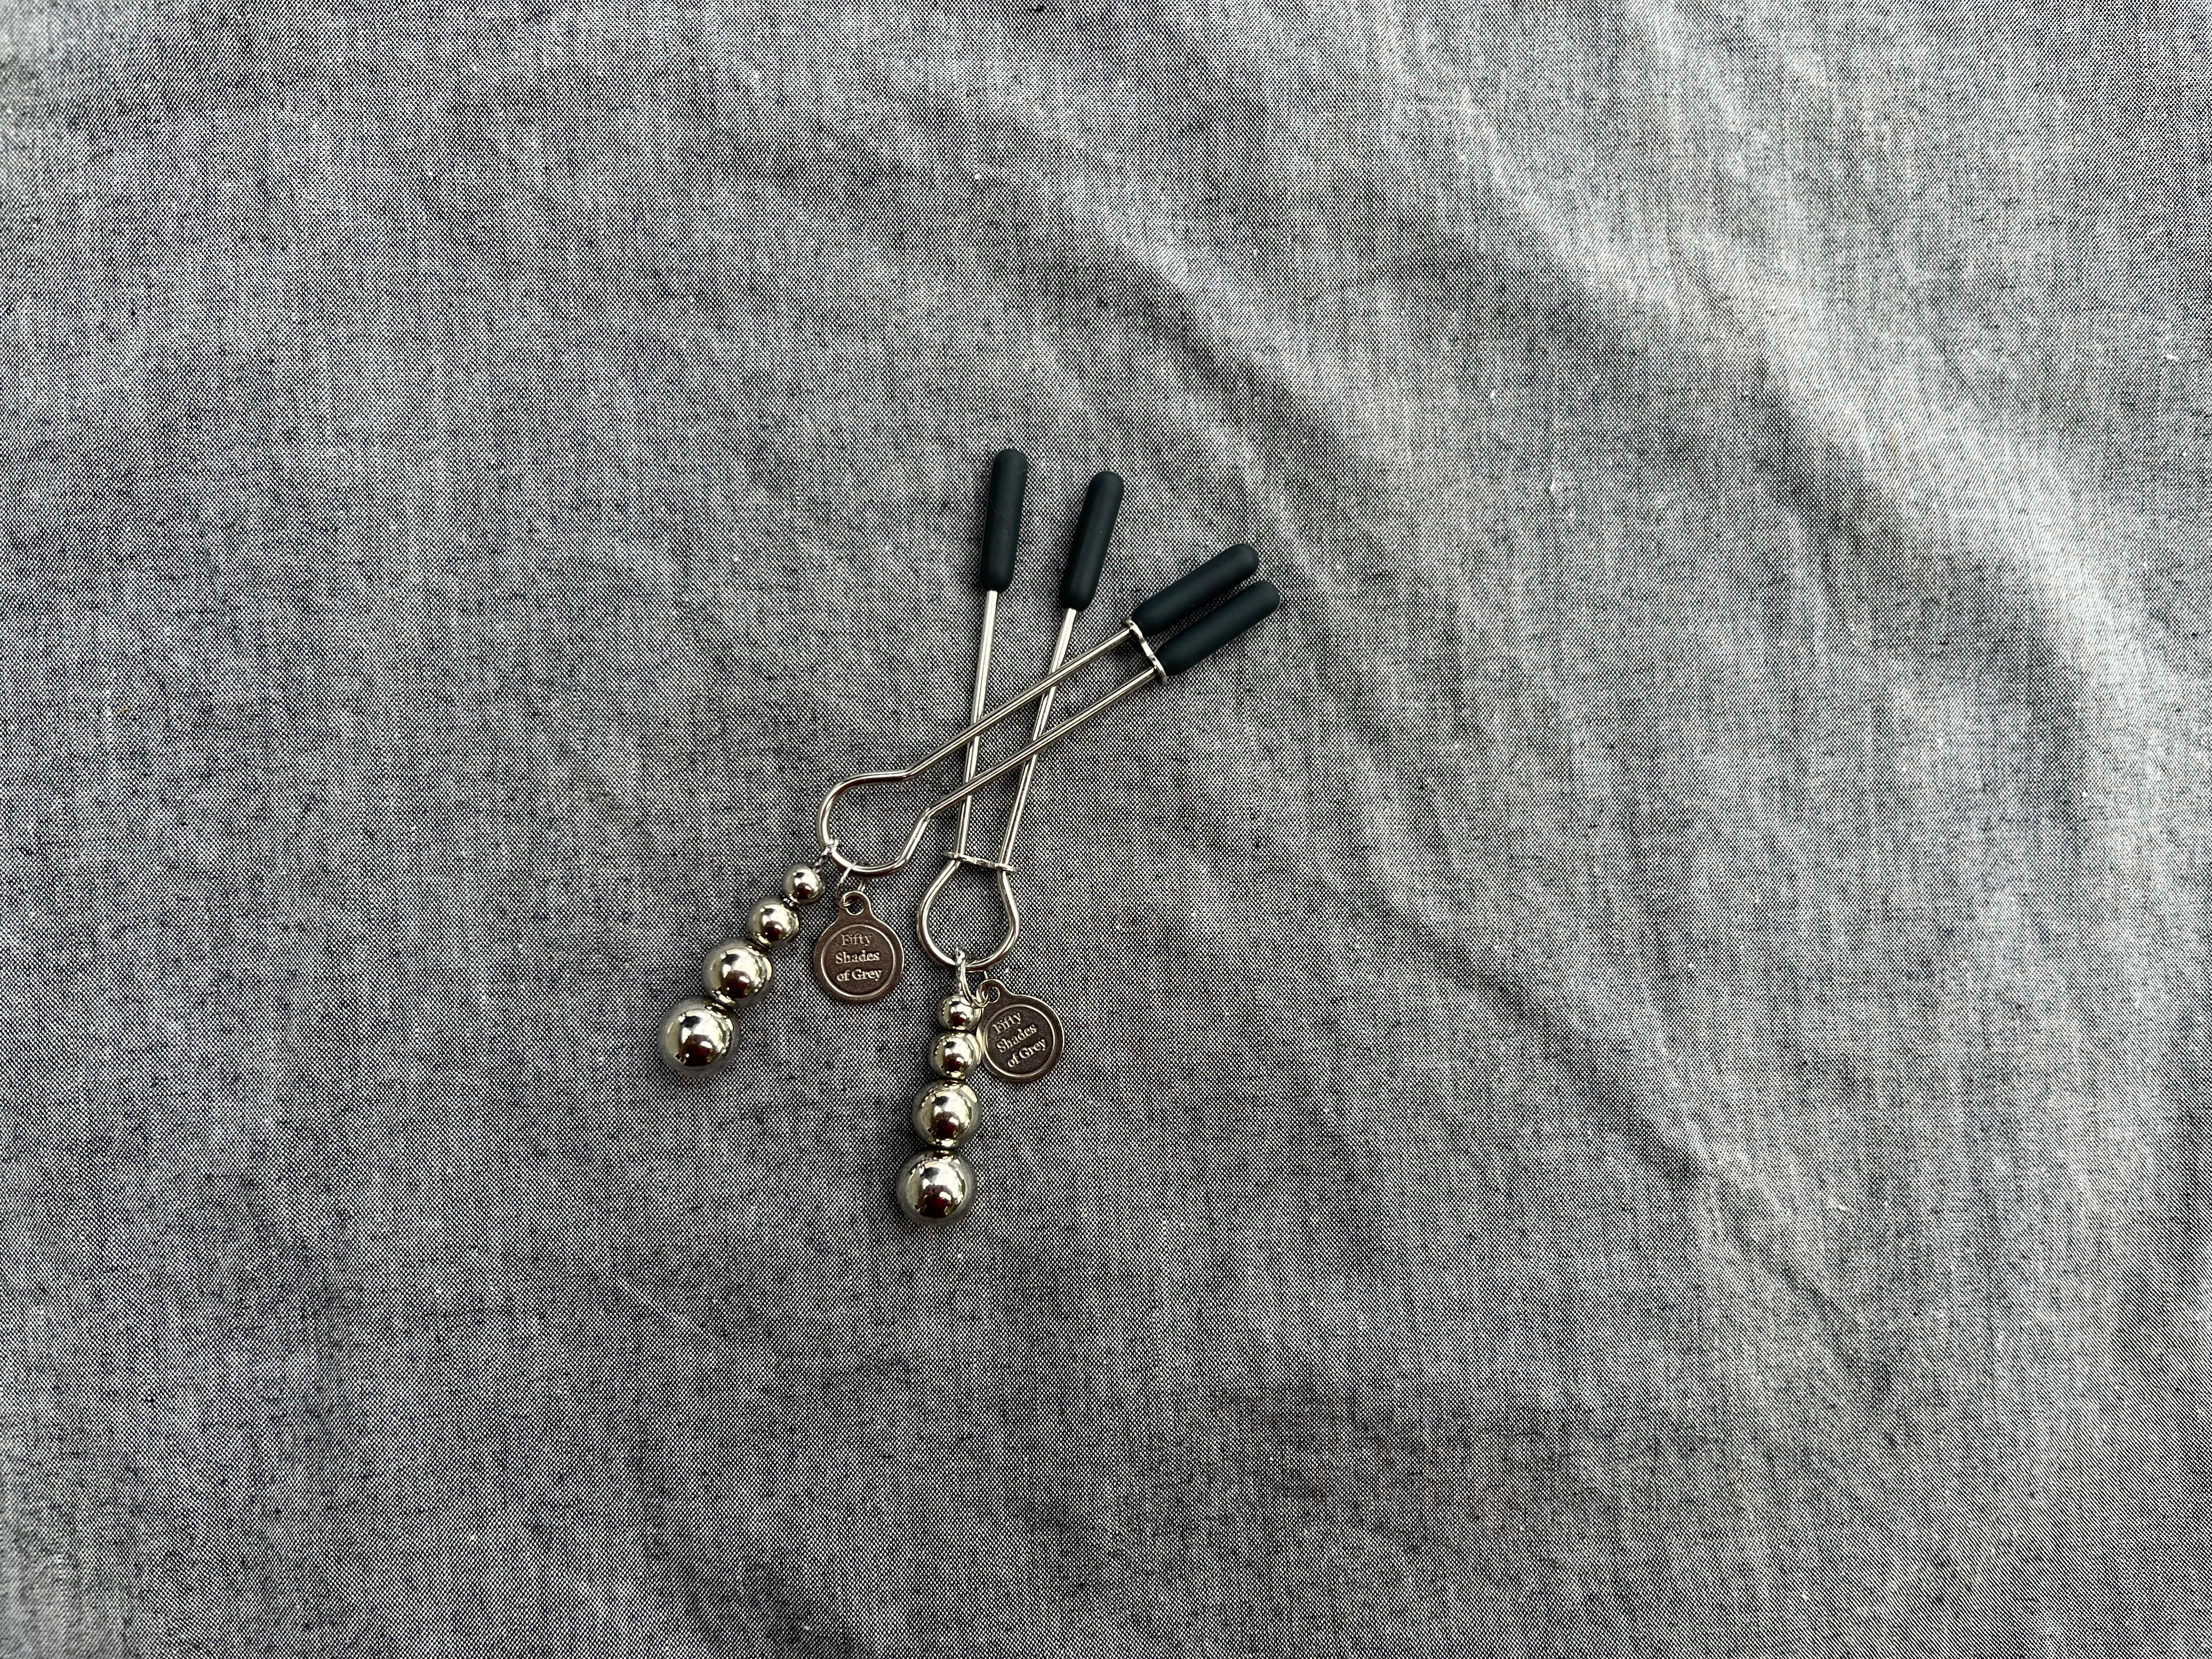 Fifty Shades of Grey The Pinch Adjustable Nipple Clamps. Slide 3